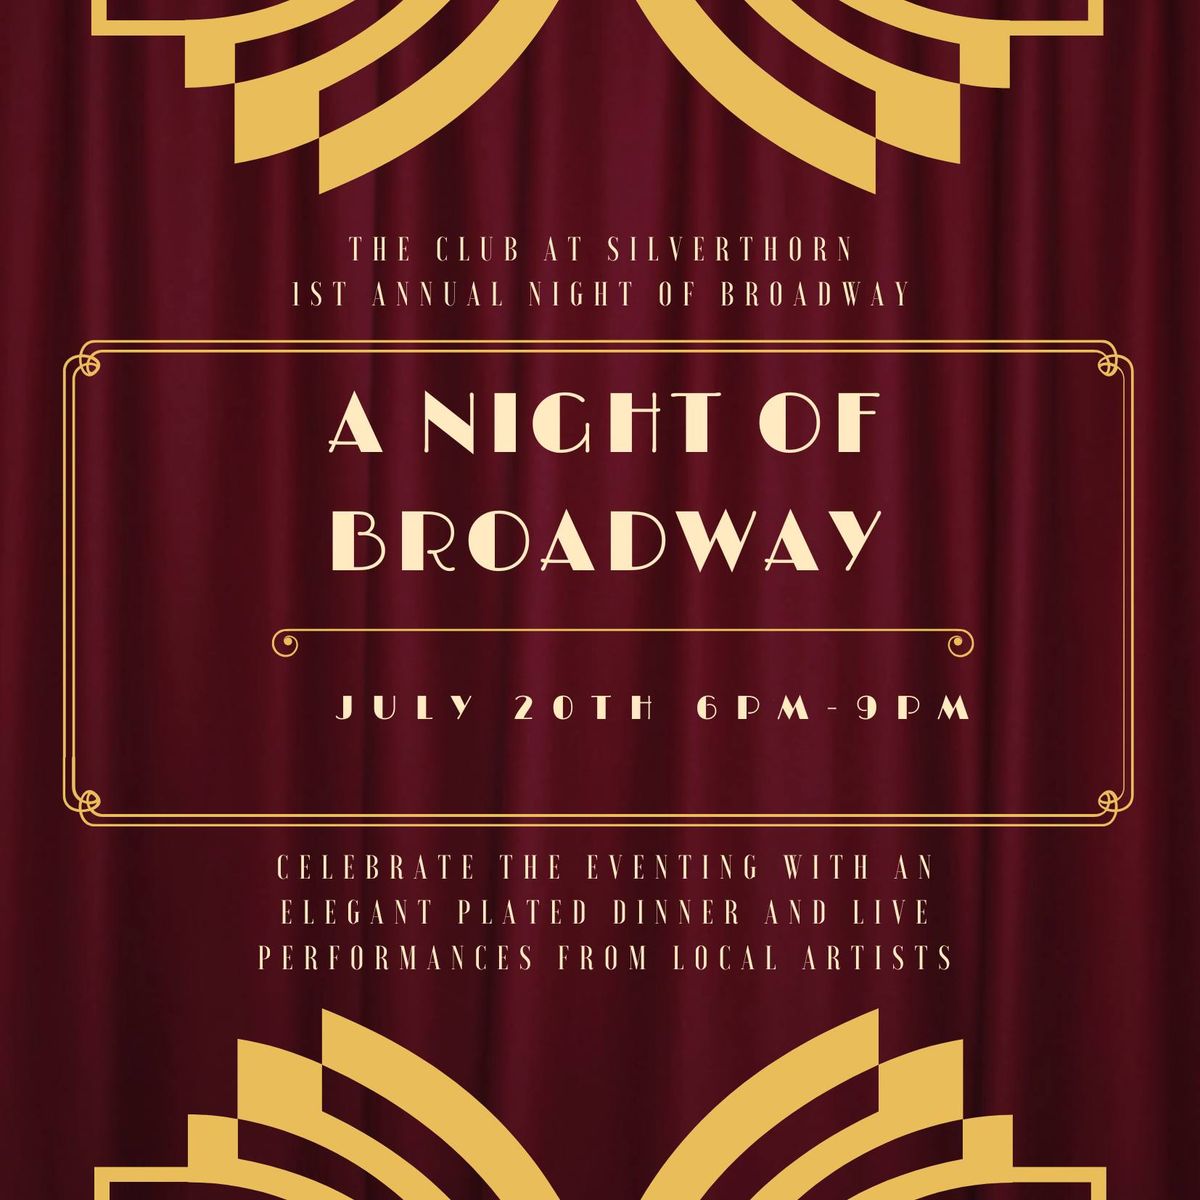 A Night of Broadway at Silverthorn